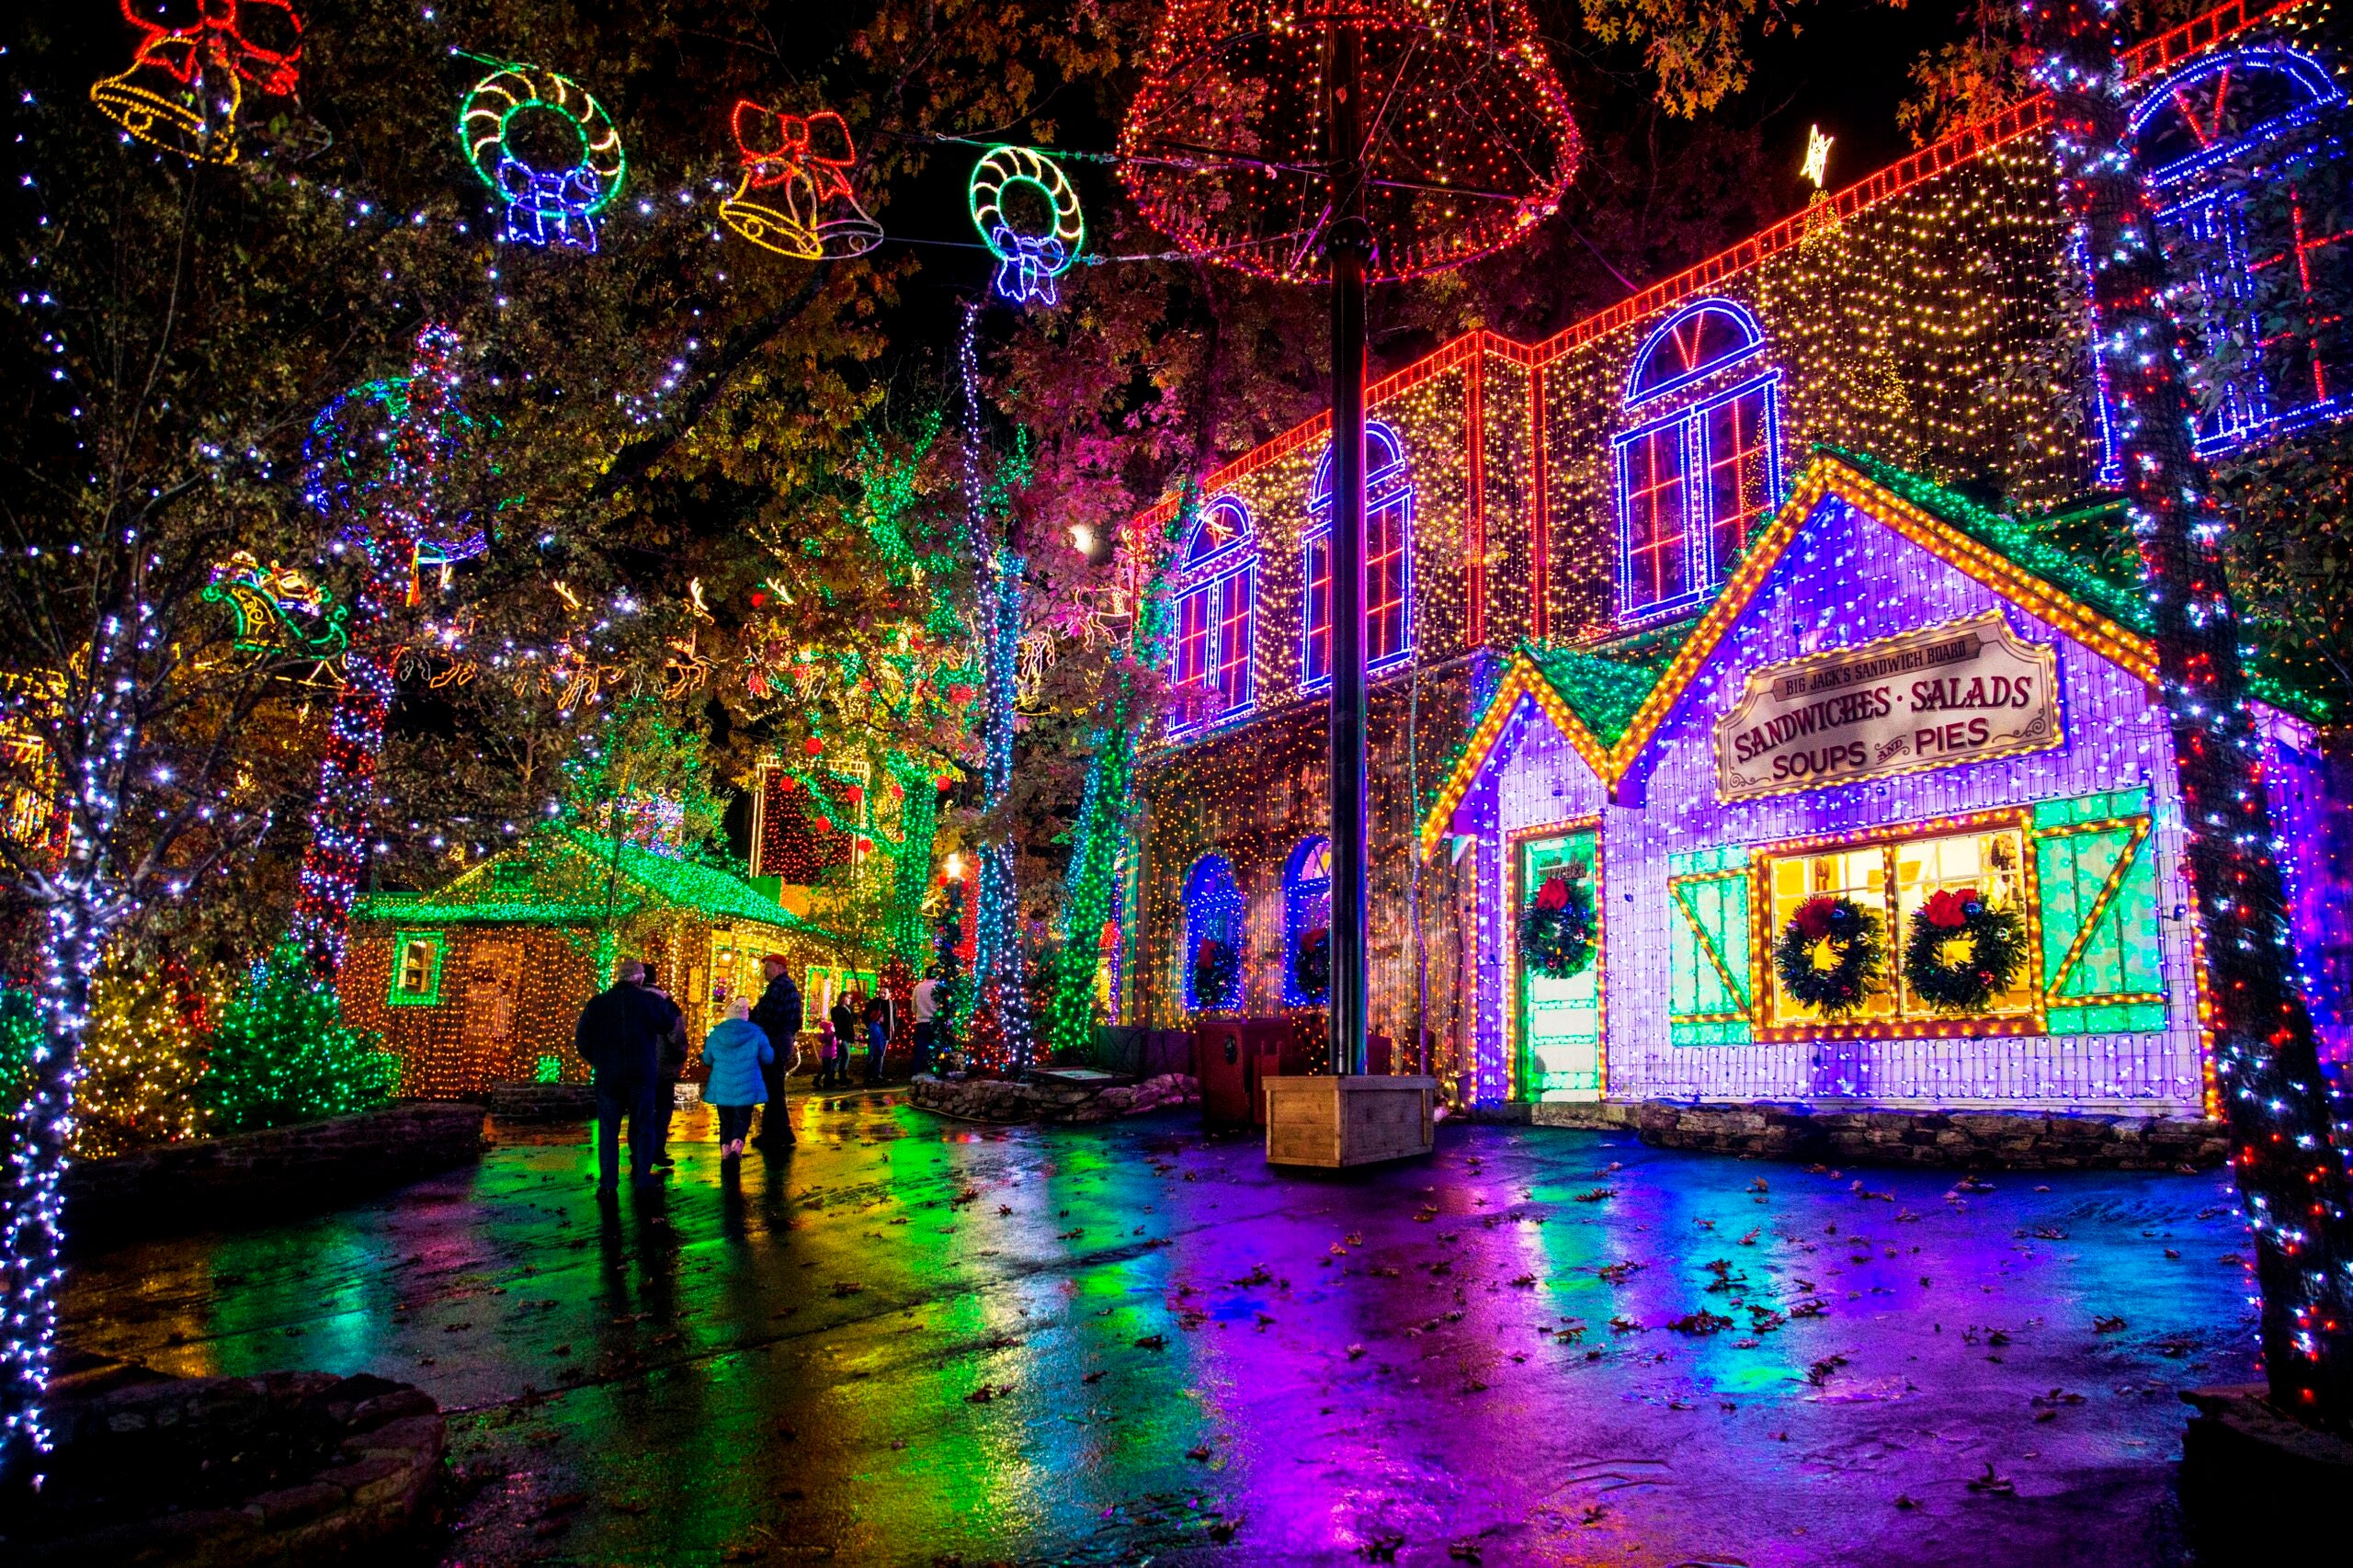 From Branson, Missouri, to Newport Beach, California, here's our guide to 13 of the best holiday light shows in the US - The Points Guy